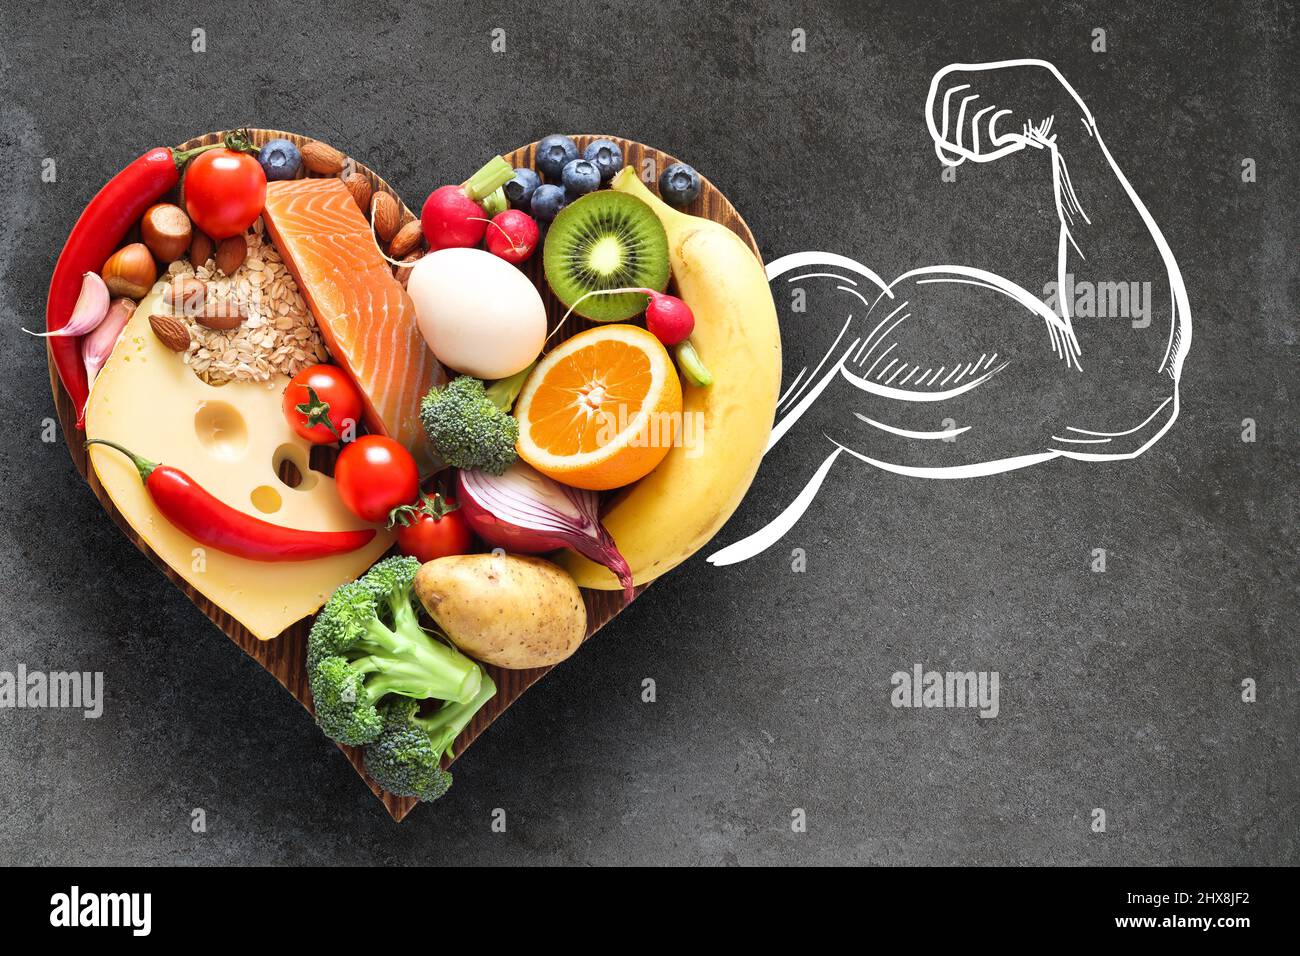 A healthy, balanced diet. Healthy food on a heart-shaped wooden cutting board and a muscular arm as a synonym for strength and health. Stock Photo